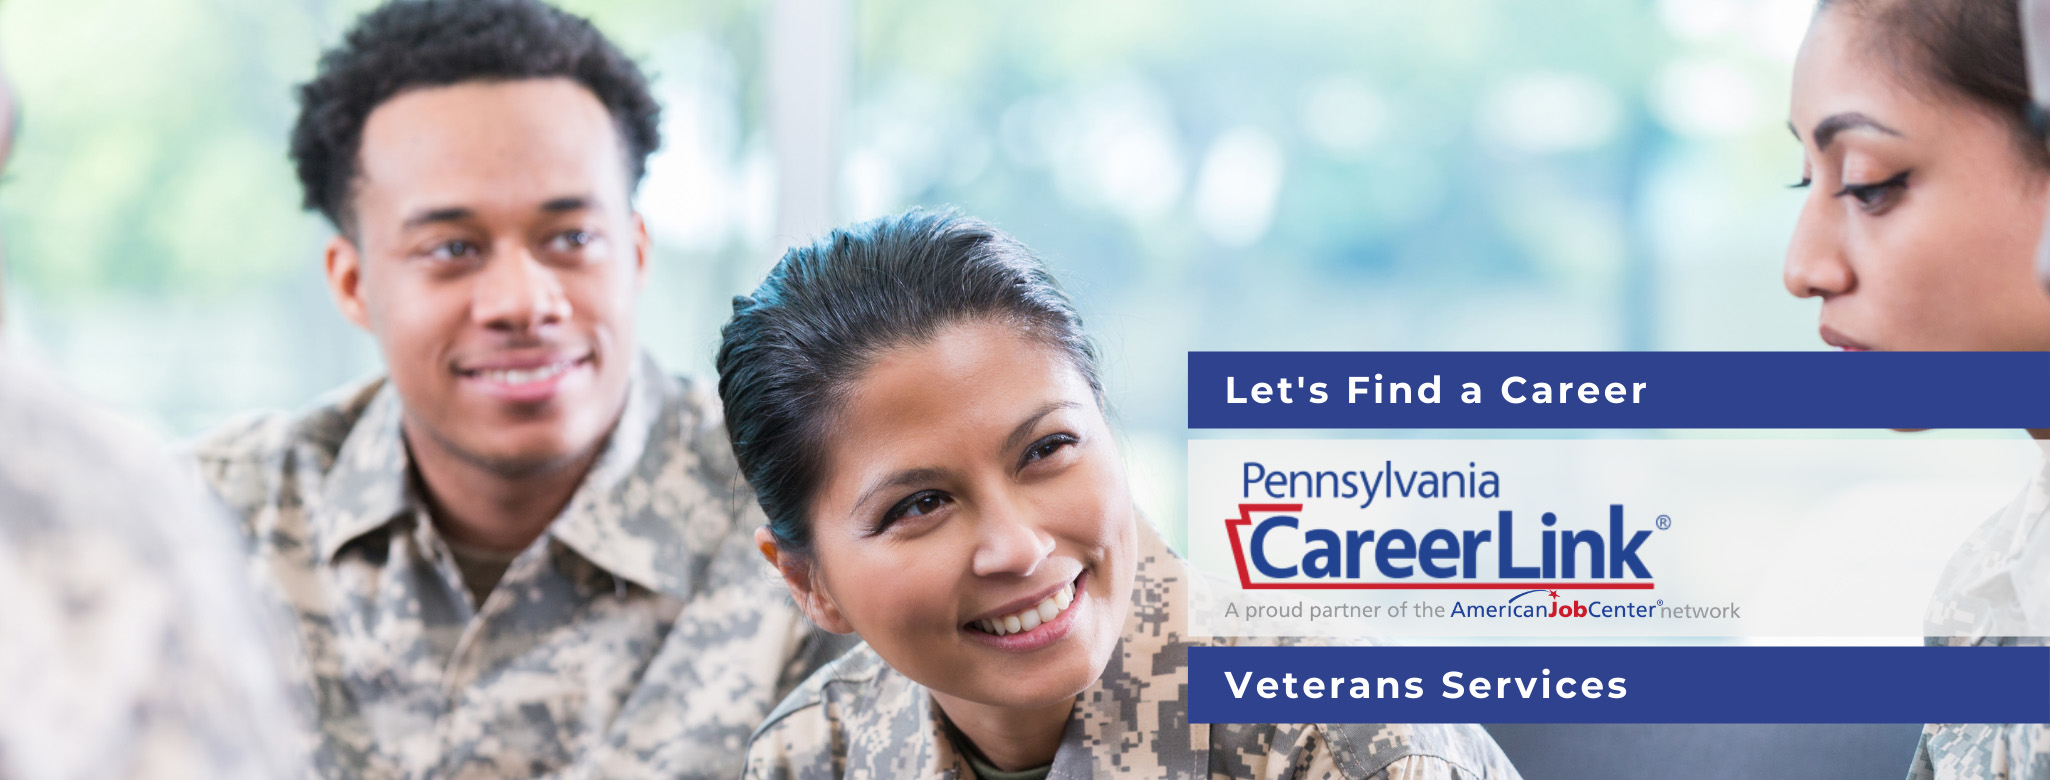 PA Careerlink Veterans Services